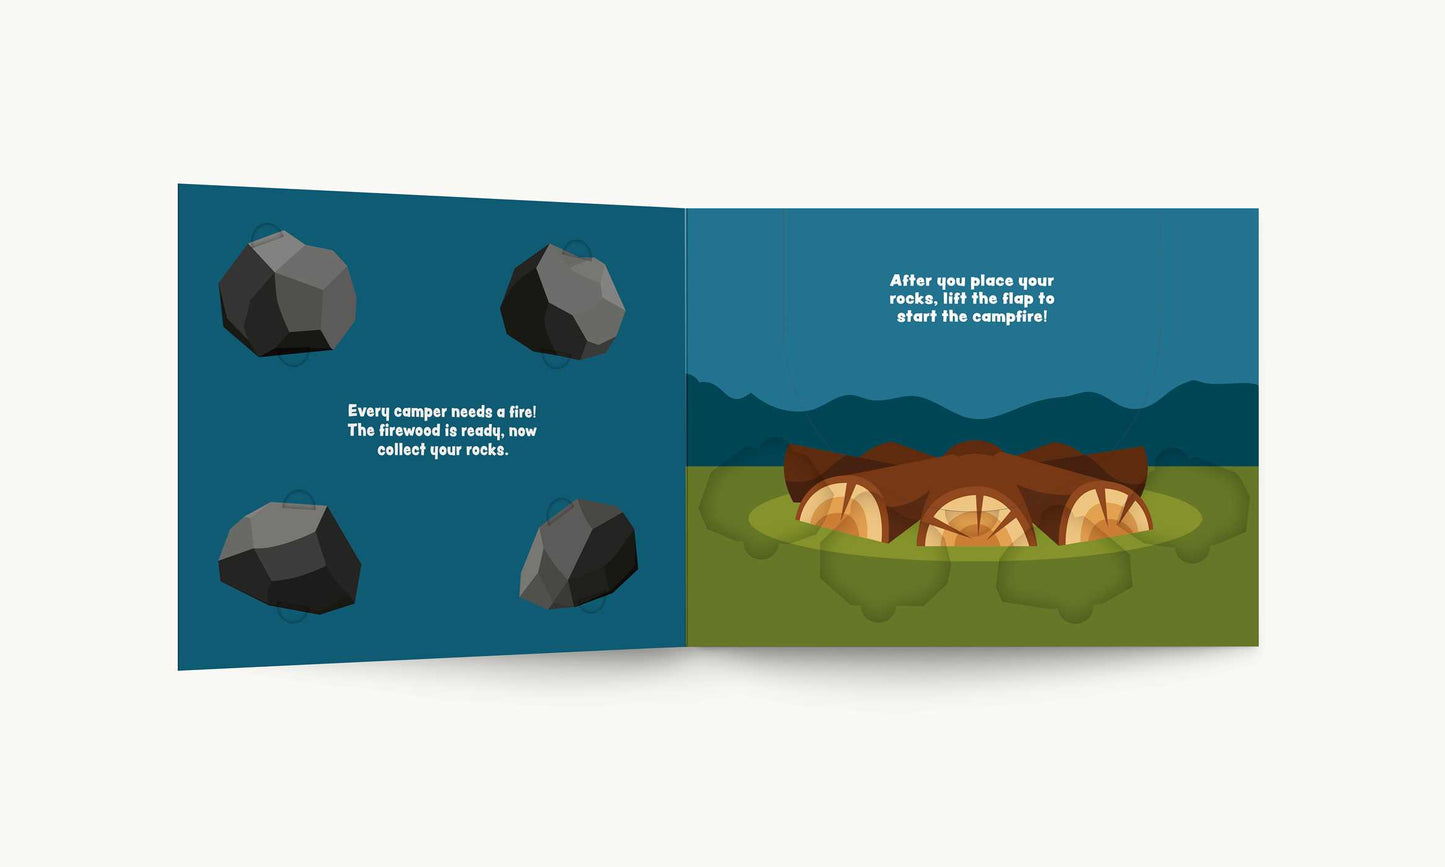 My First Campout: Get Ready for the Great Outdoors with this Interactive Board Book!